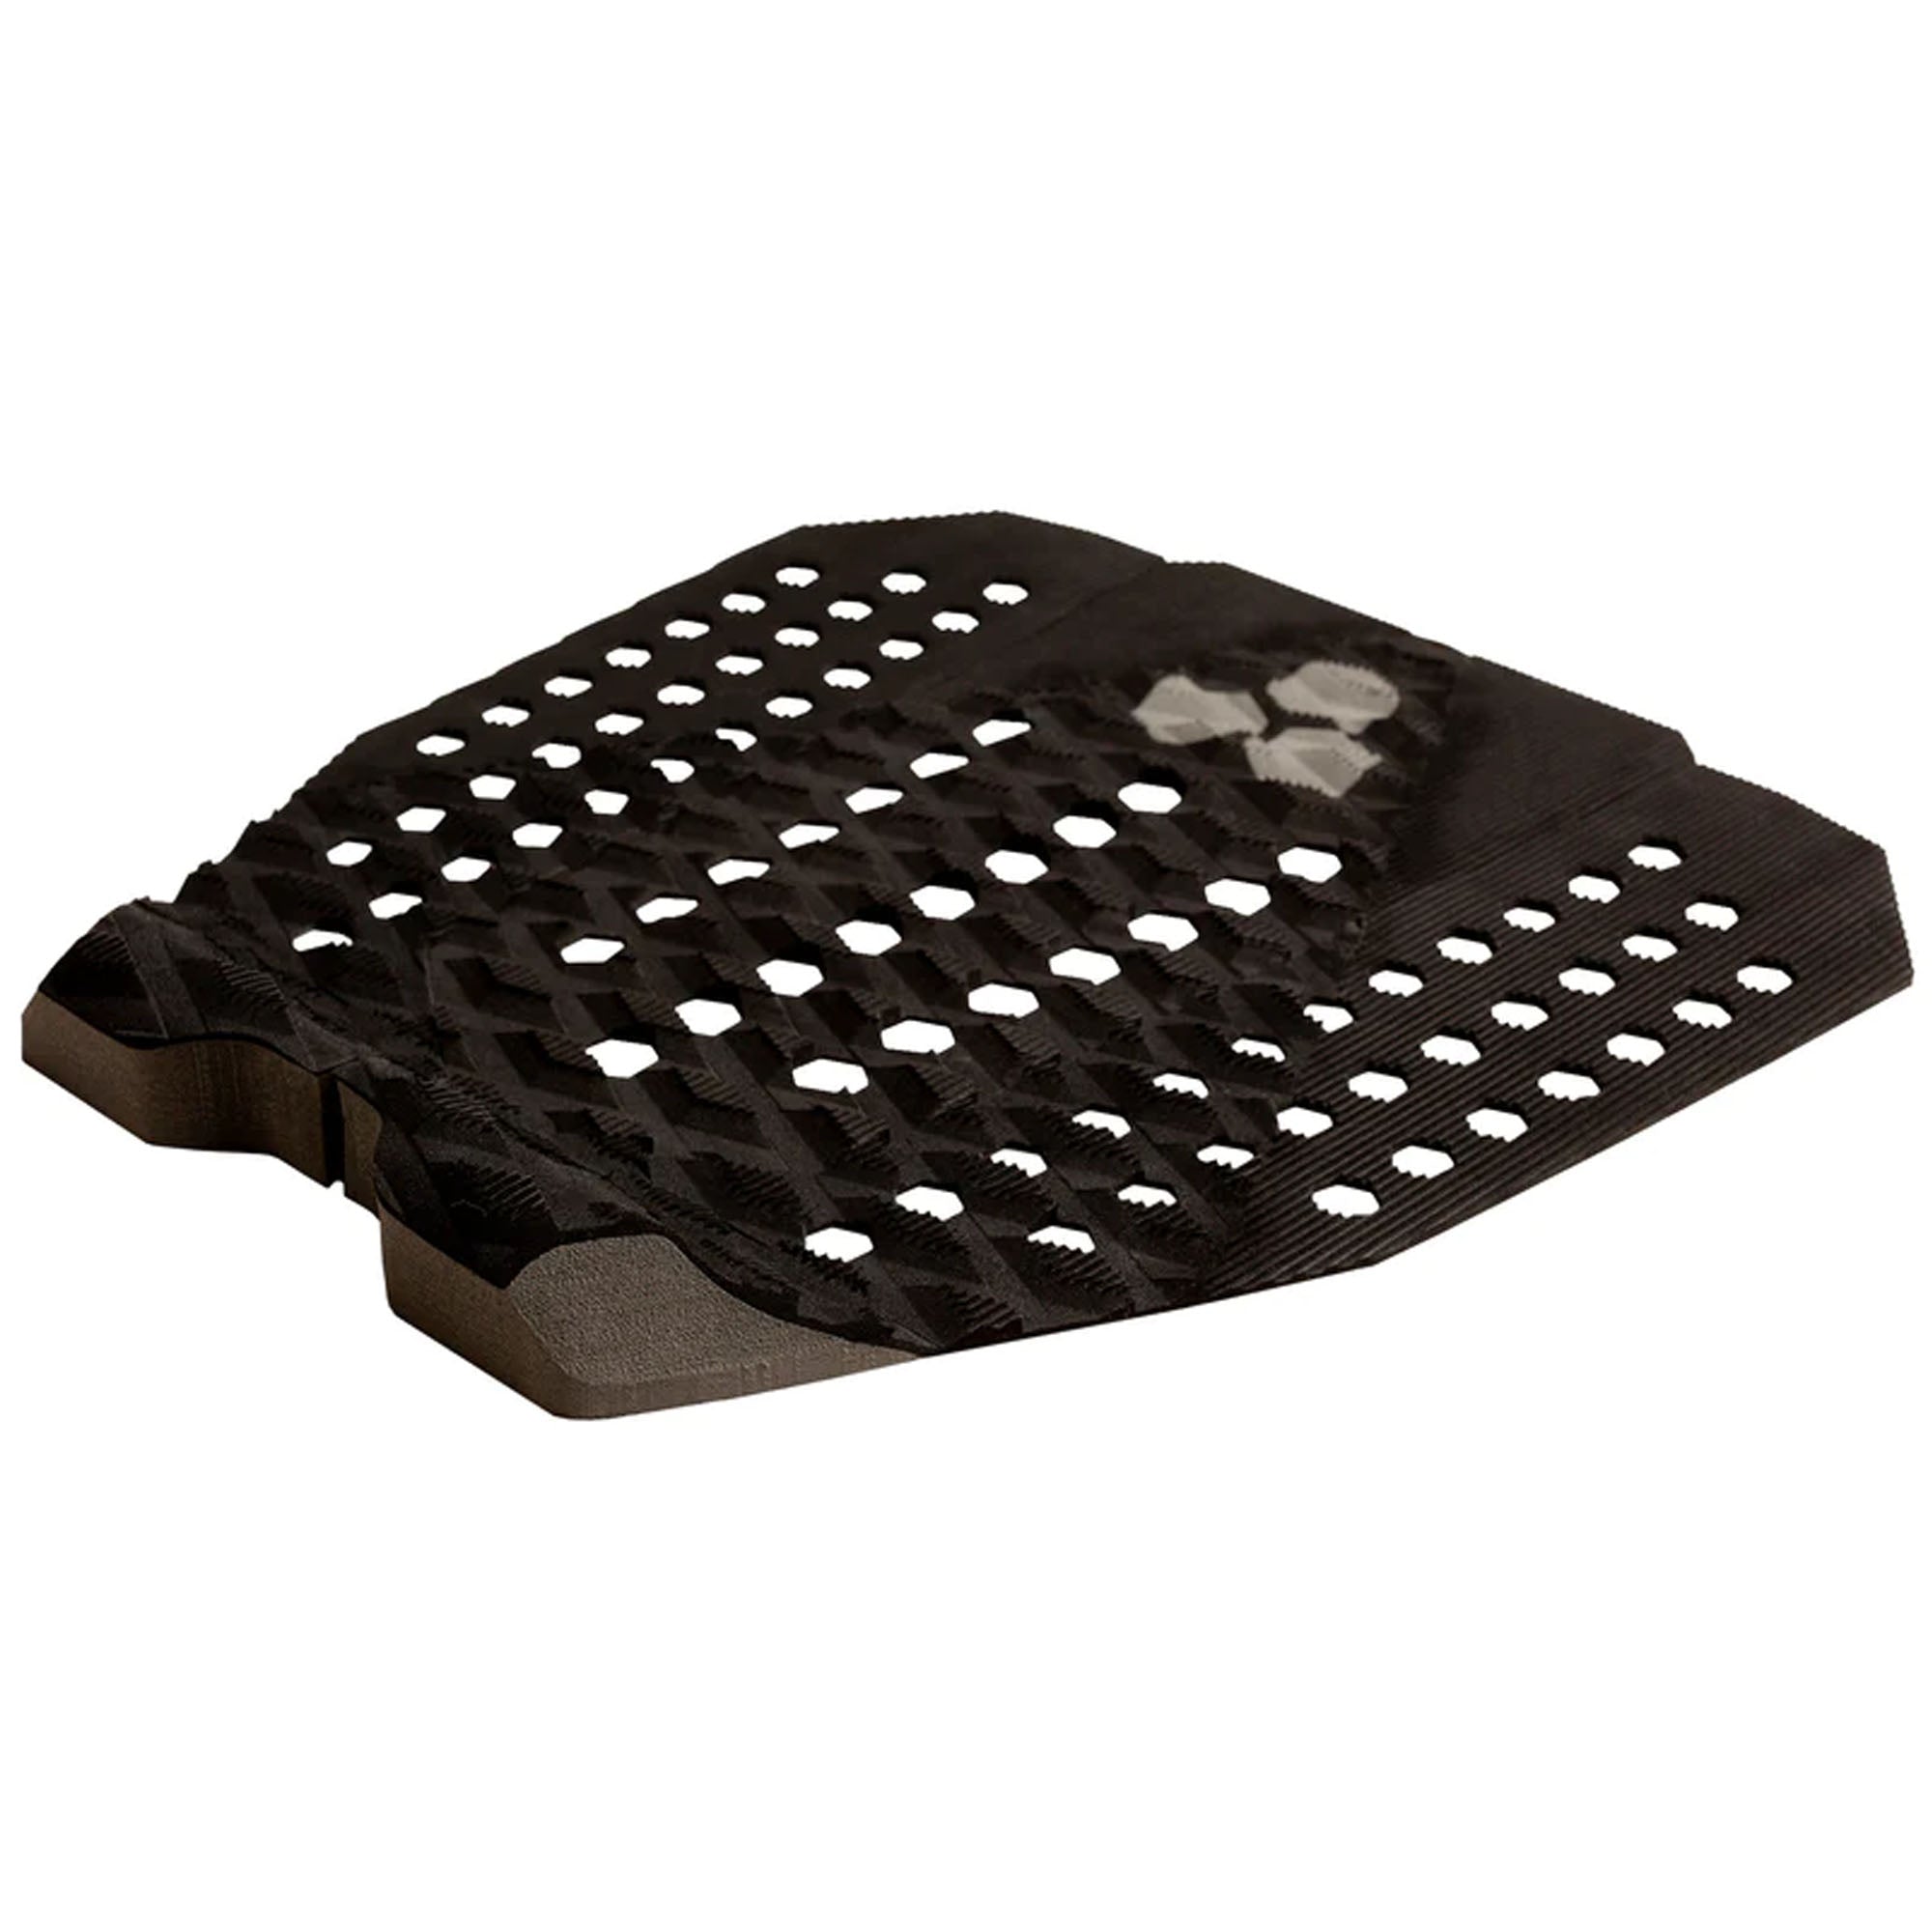 Channel Islands Flux Flat Traction Pad